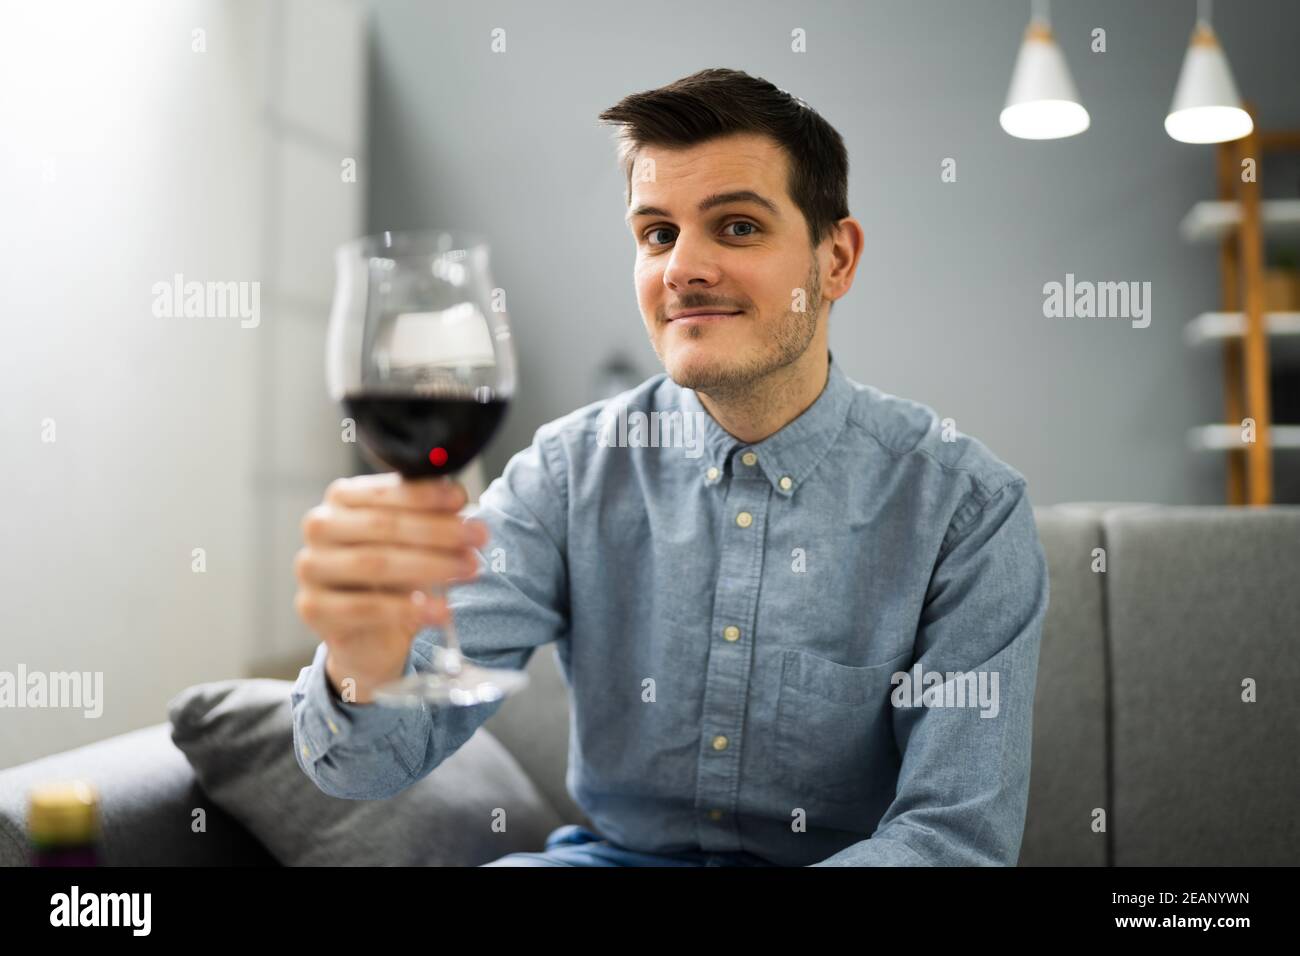 Man Drinking Red Wine In Video Conference Stock Photo